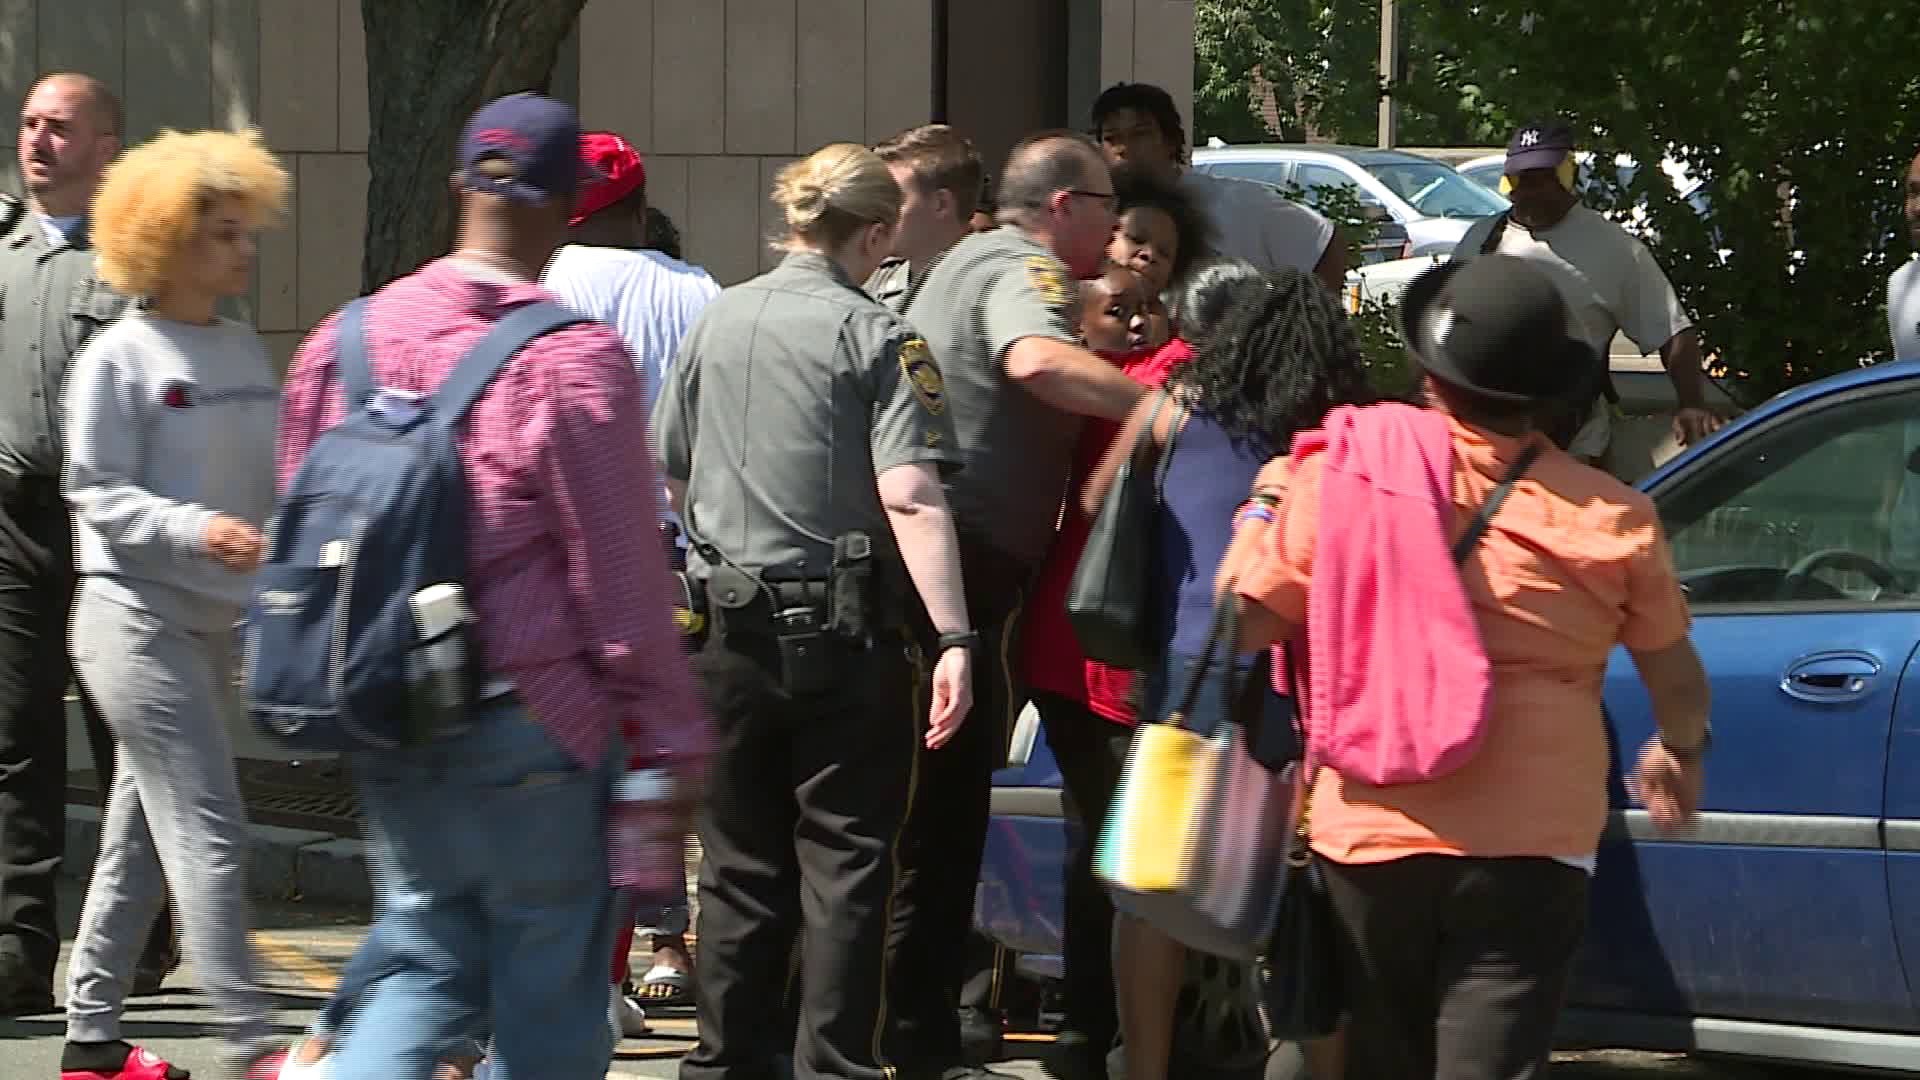 Murder suspect arraigned in Hartford; Families in shouting match outside court....